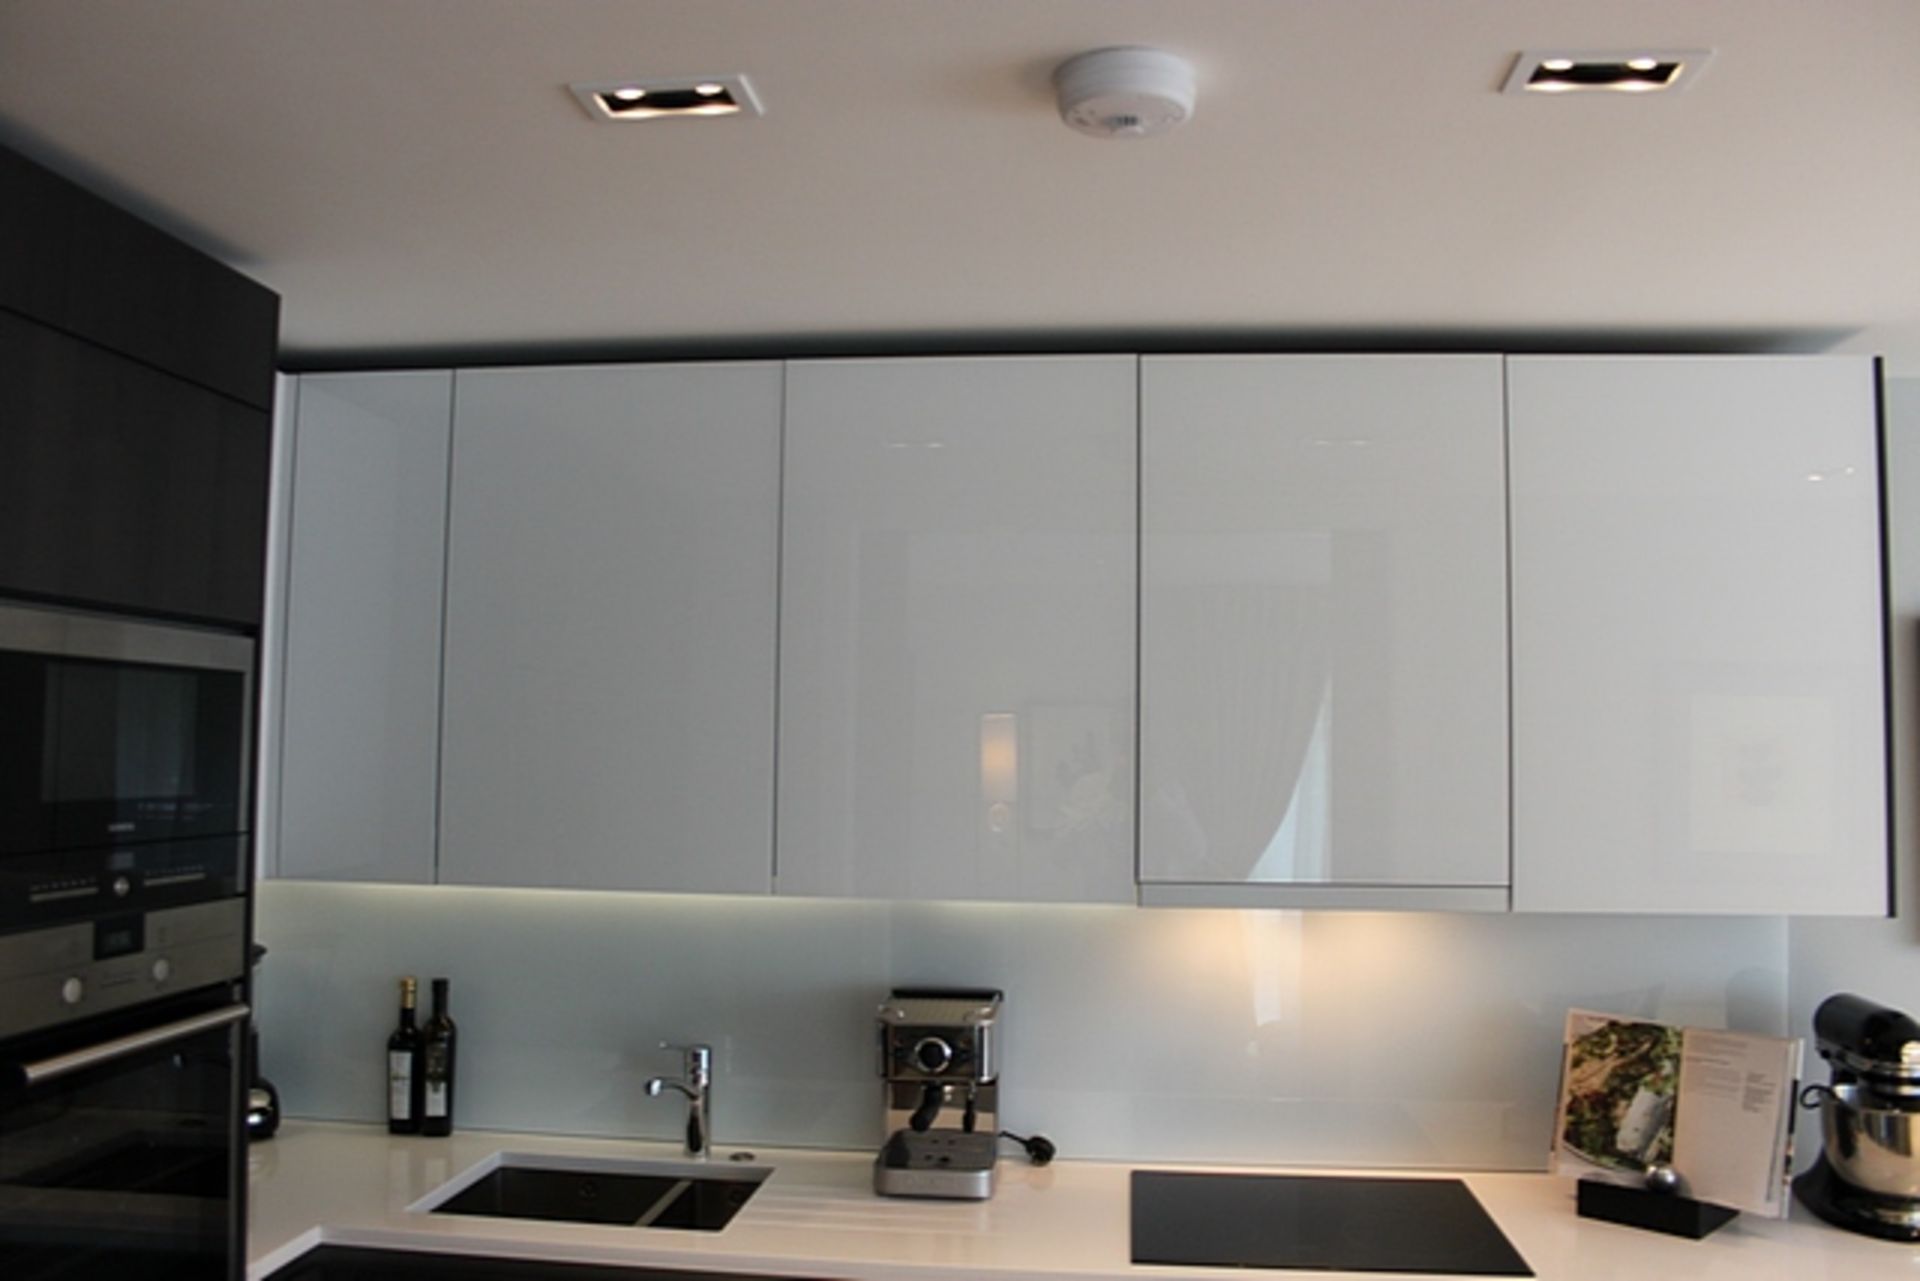 Complete U shaped kitchen with base and wall cabinets complete with Siemens integral appliances of - Image 5 of 15